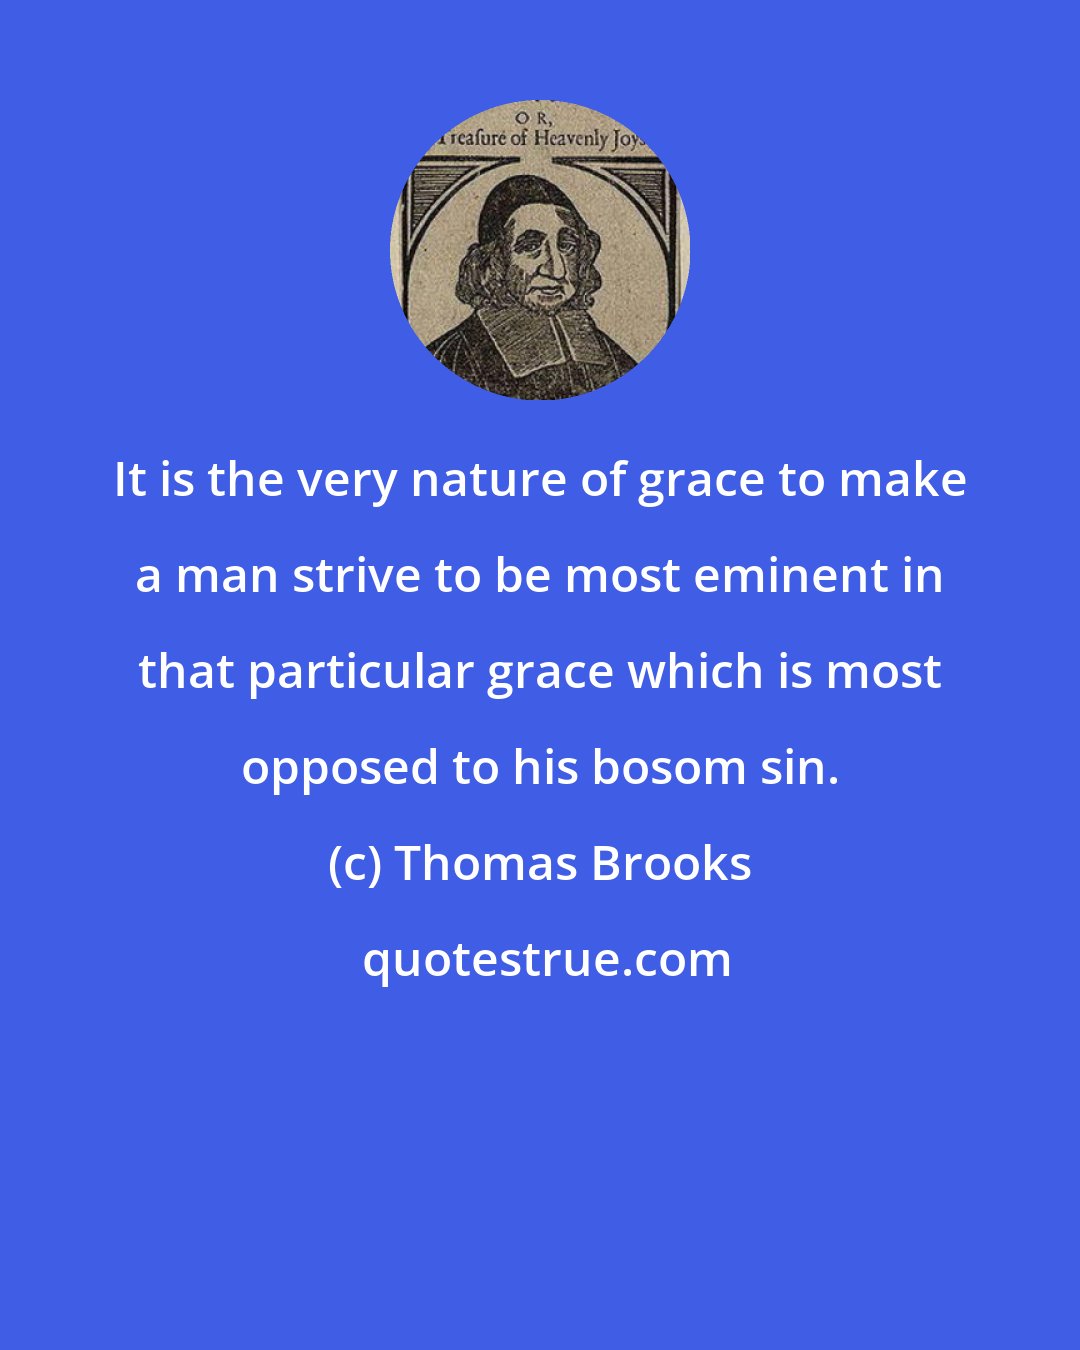 Thomas Brooks: It is the very nature of grace to make a man strive to be most eminent in that particular grace which is most opposed to his bosom sin.